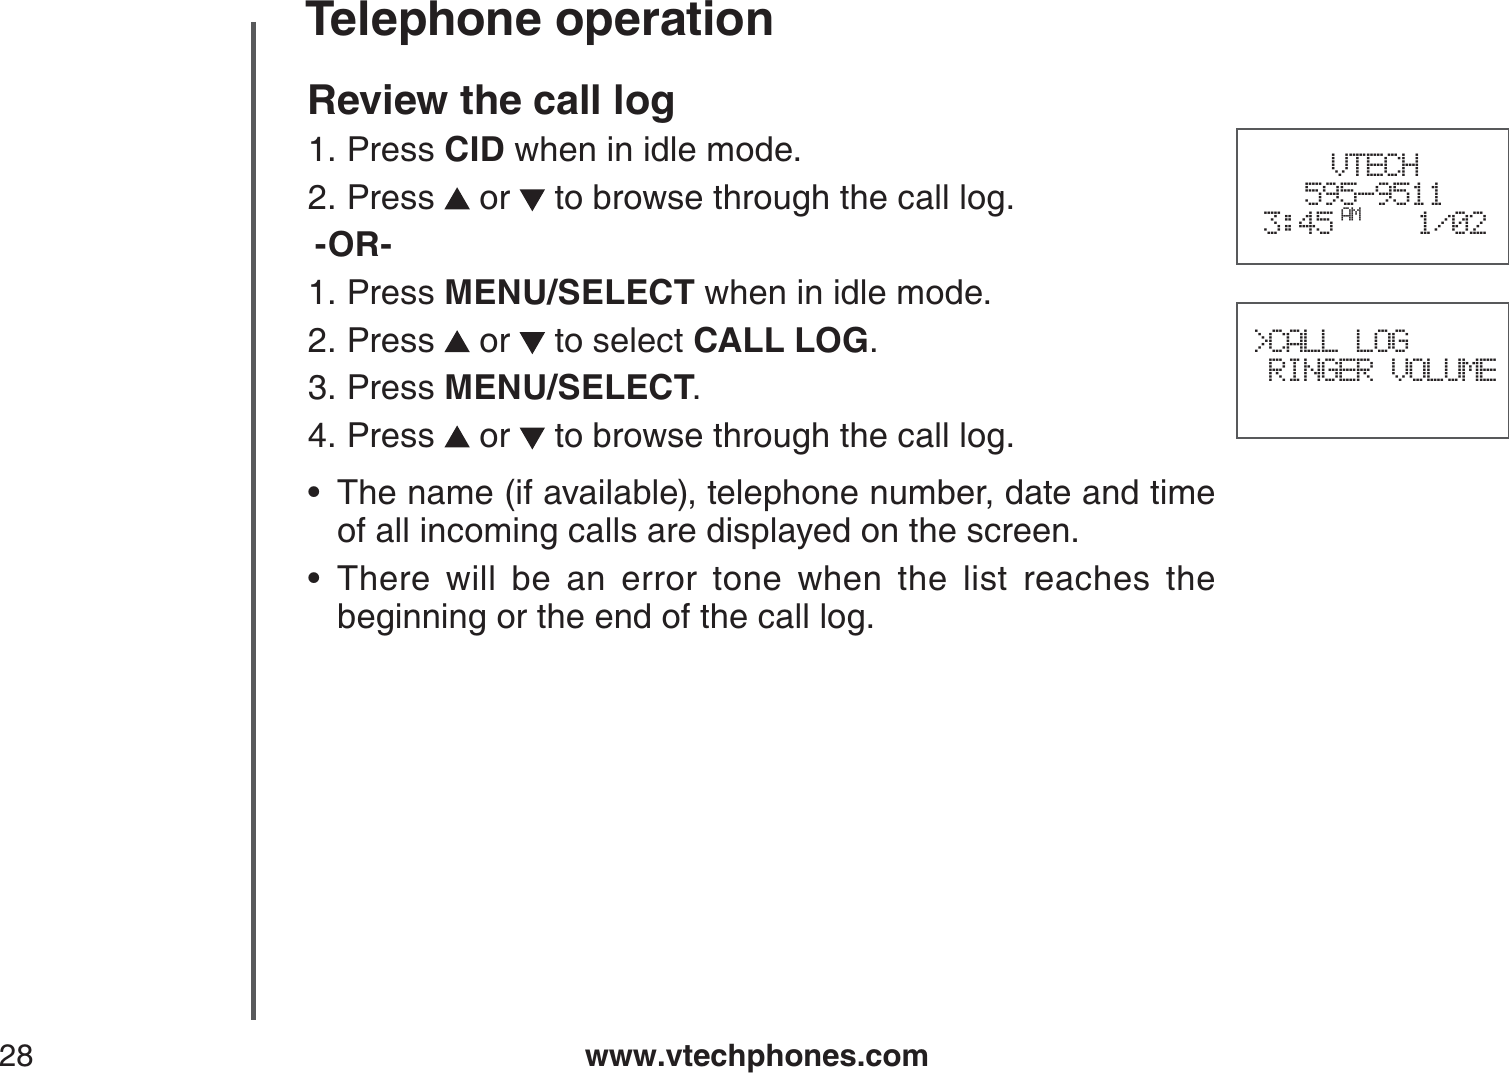 www.vtechphones.com28Telephone operationReview the call log Press CID when in idle mode.Press   or   to browse through the call log.-OR-Press MENU/SELECT when in idle mode.Press   or   to select CALL LOG.Press MENU/SELECT.Press   or   to browse through the call log.The name (if available), telephone number, date and time of all incoming calls are displayed on the screen.There will be an error tone when the list reaches the beginning or the end of the call log.1.2.1.2.3.4.••VTECH595-95113:45 AM 1/02  &gt;CALL LOG RINGER VOLUME